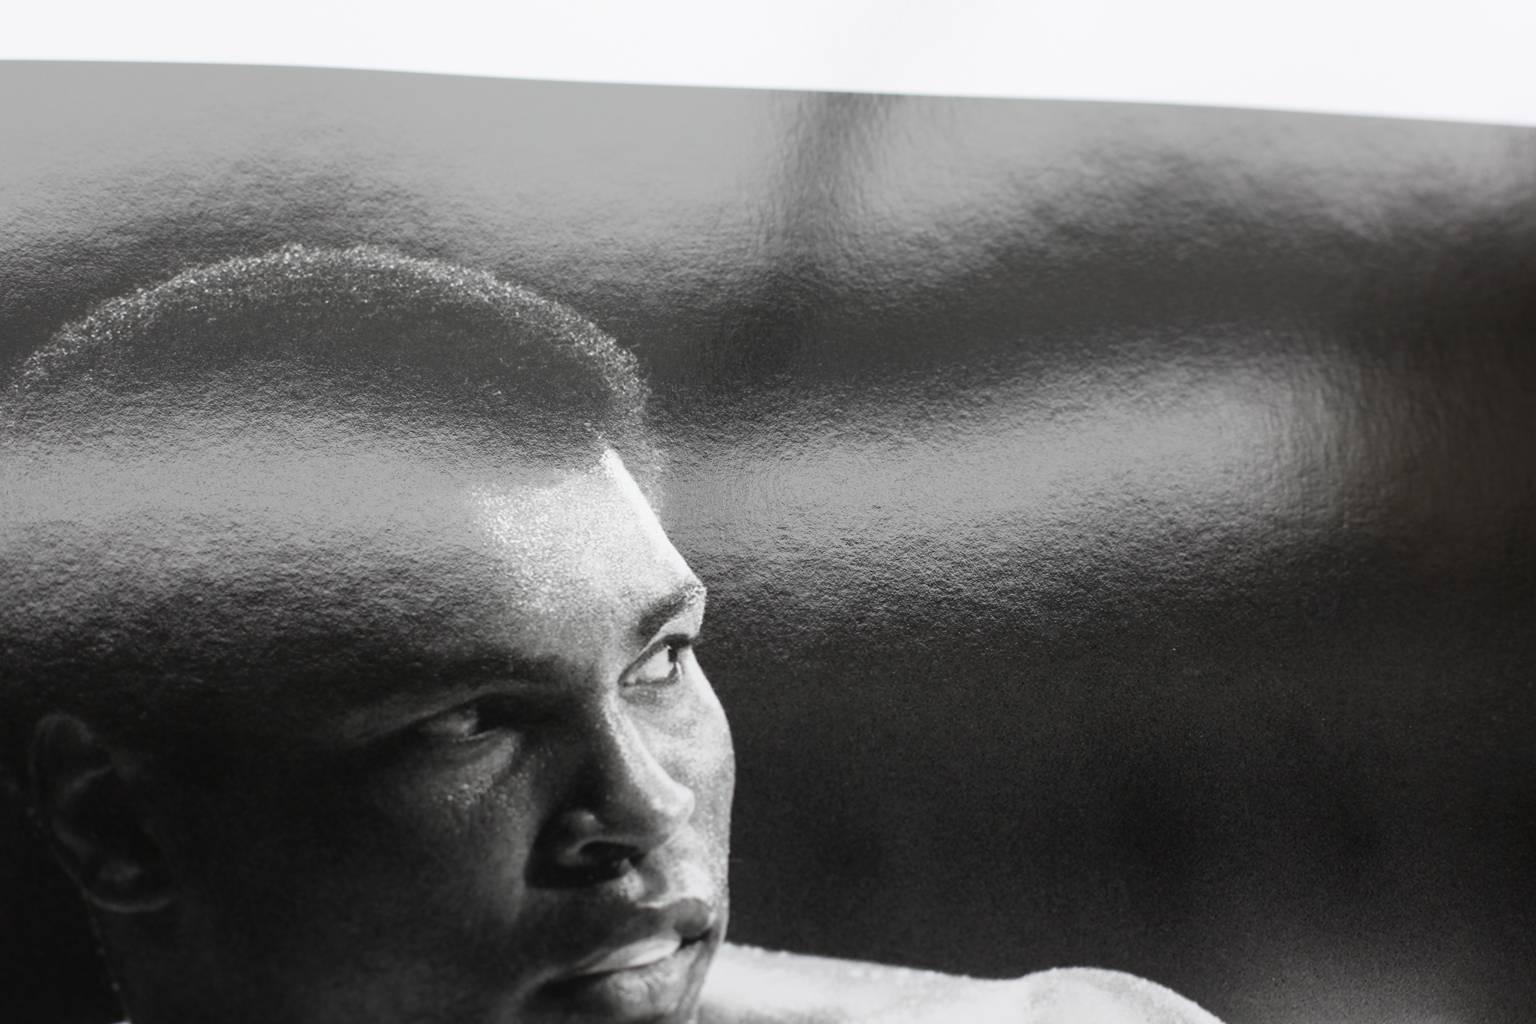 'Muhammad Ali' 1974

Cassius Clay (Muhammad Ali) seen here at his training camp Deer Lake in Pennsylvania. Ali is in training for his fight with George Foreman, 27th August 1974. (photo Mirror Trinity Group Archives)

A beautiful silver gelatin